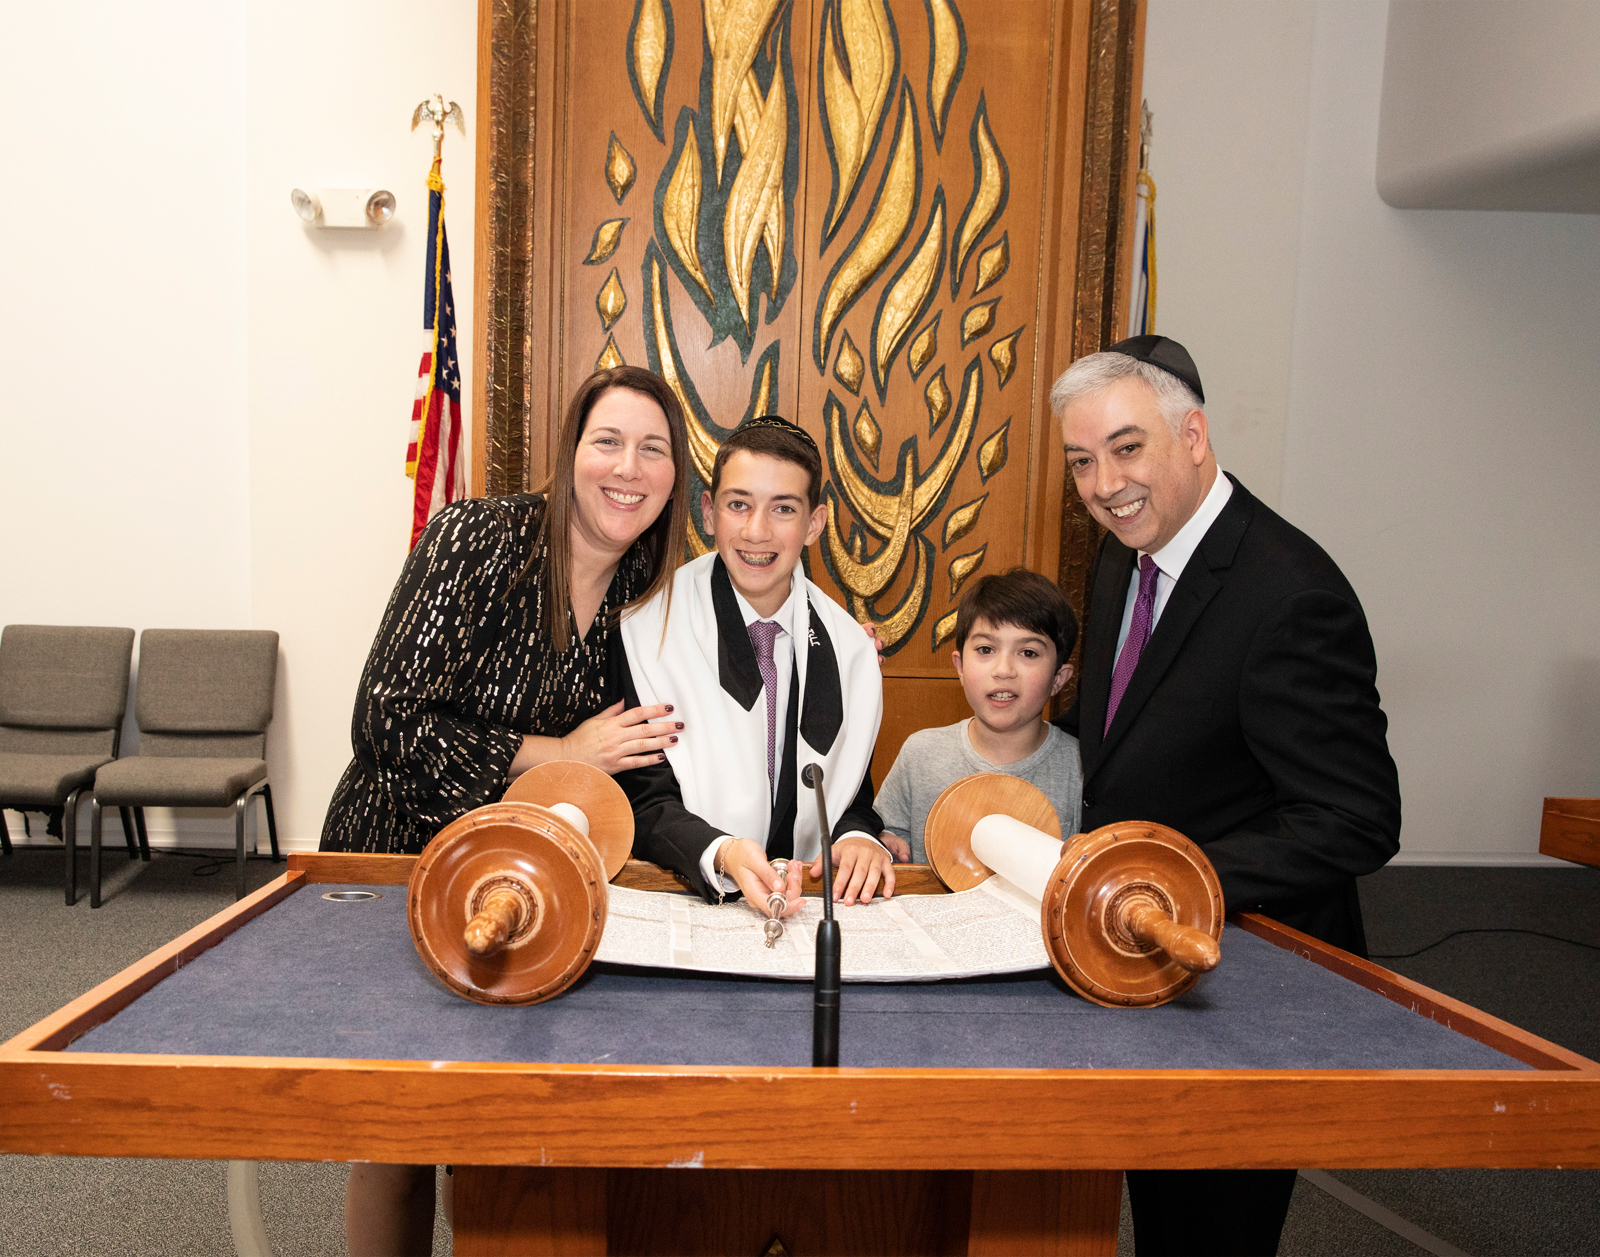 Max DiGuiseppe 2022 Mitzvah Photography Annette Leibovitz